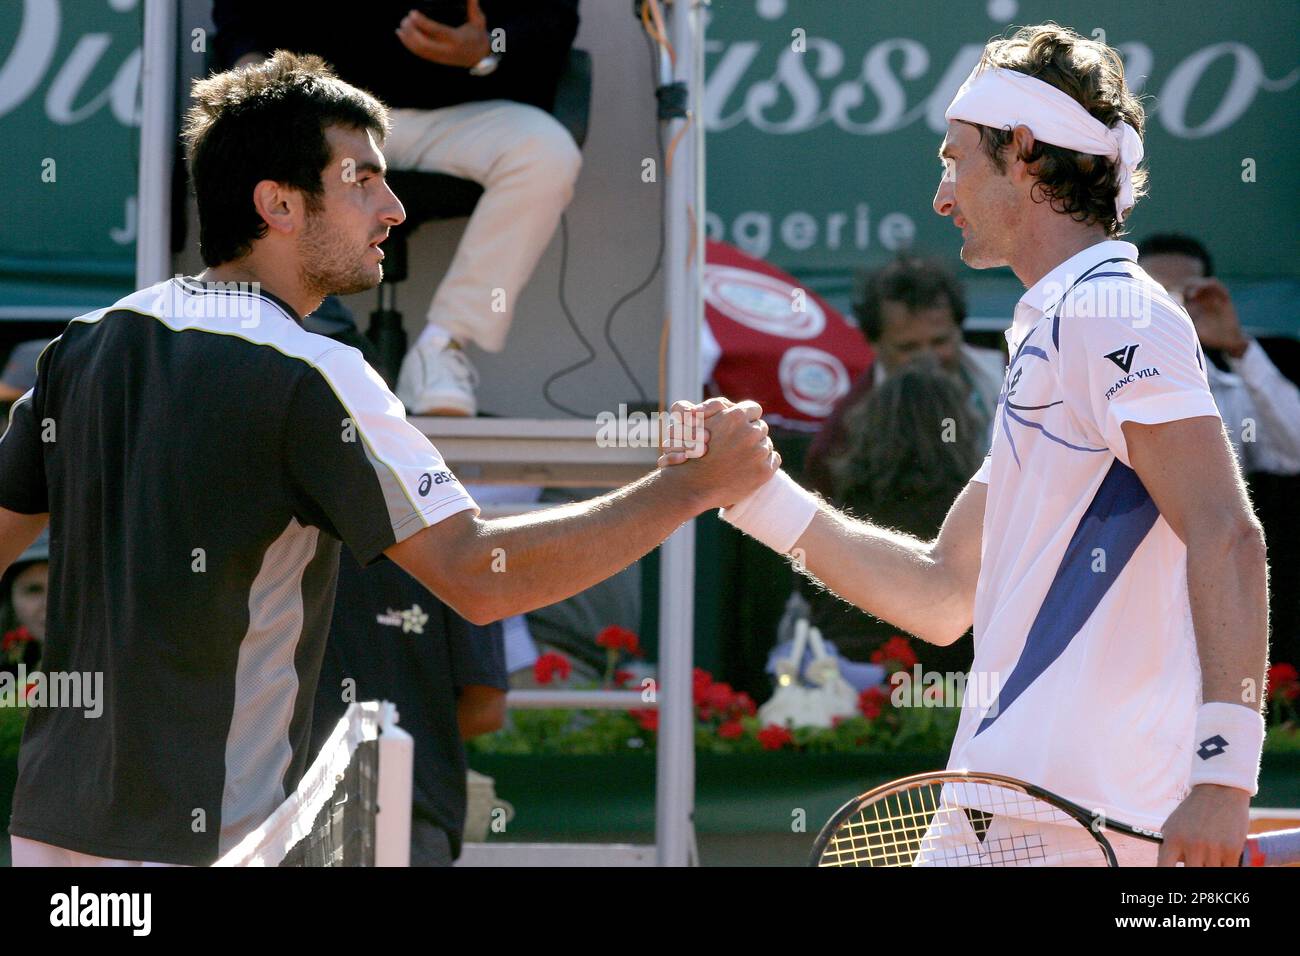 Juan Carlos Ferrero from Spain (right) shakes hand Florent Serra from france (left) after the final of the Grand Prix Hassan II, a euro450,000 ATP Tour event on outdoor clay at Complexe